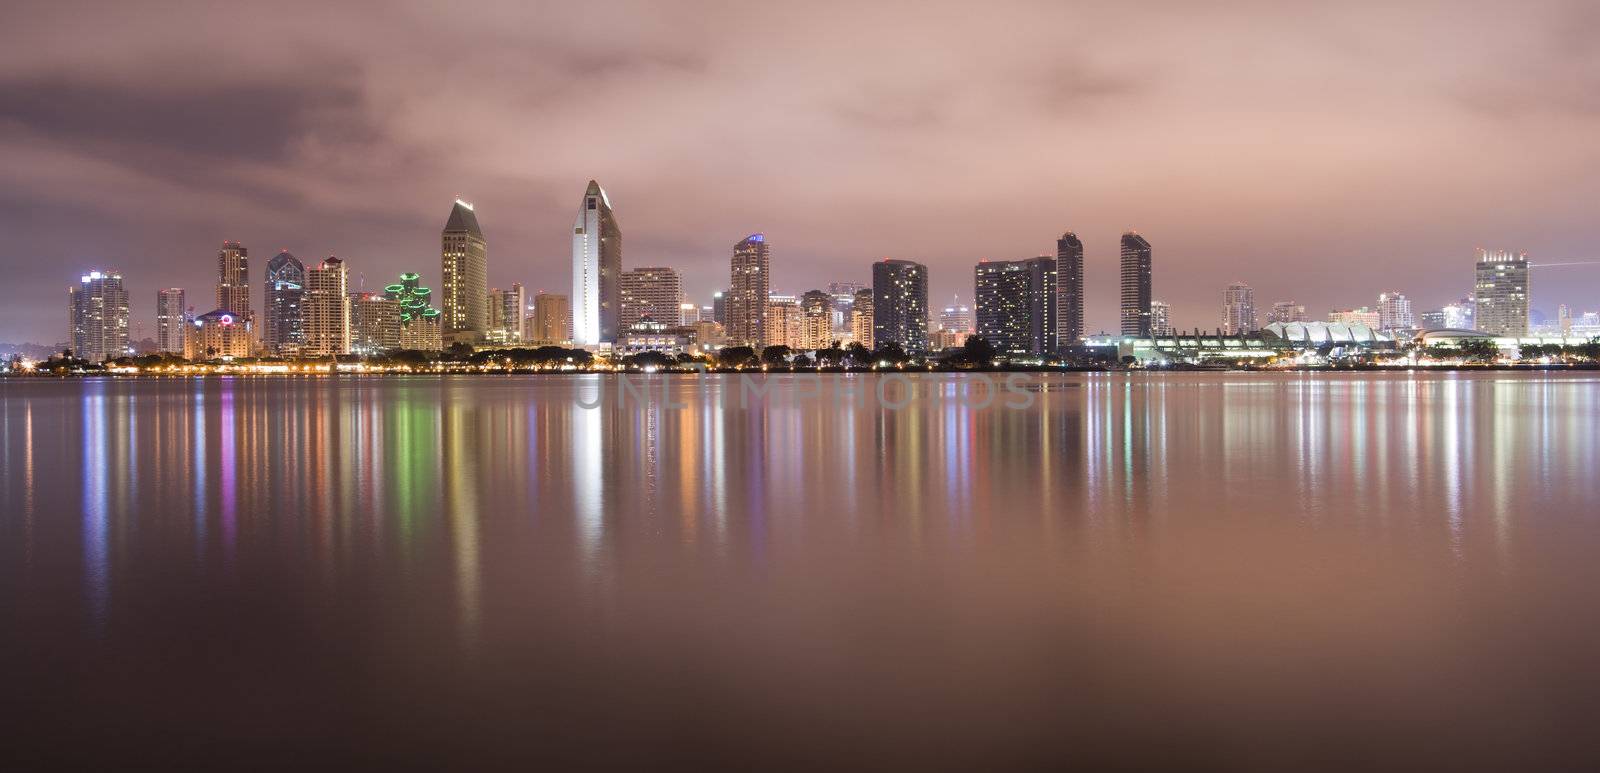 San Diego California by ChrisBoswell